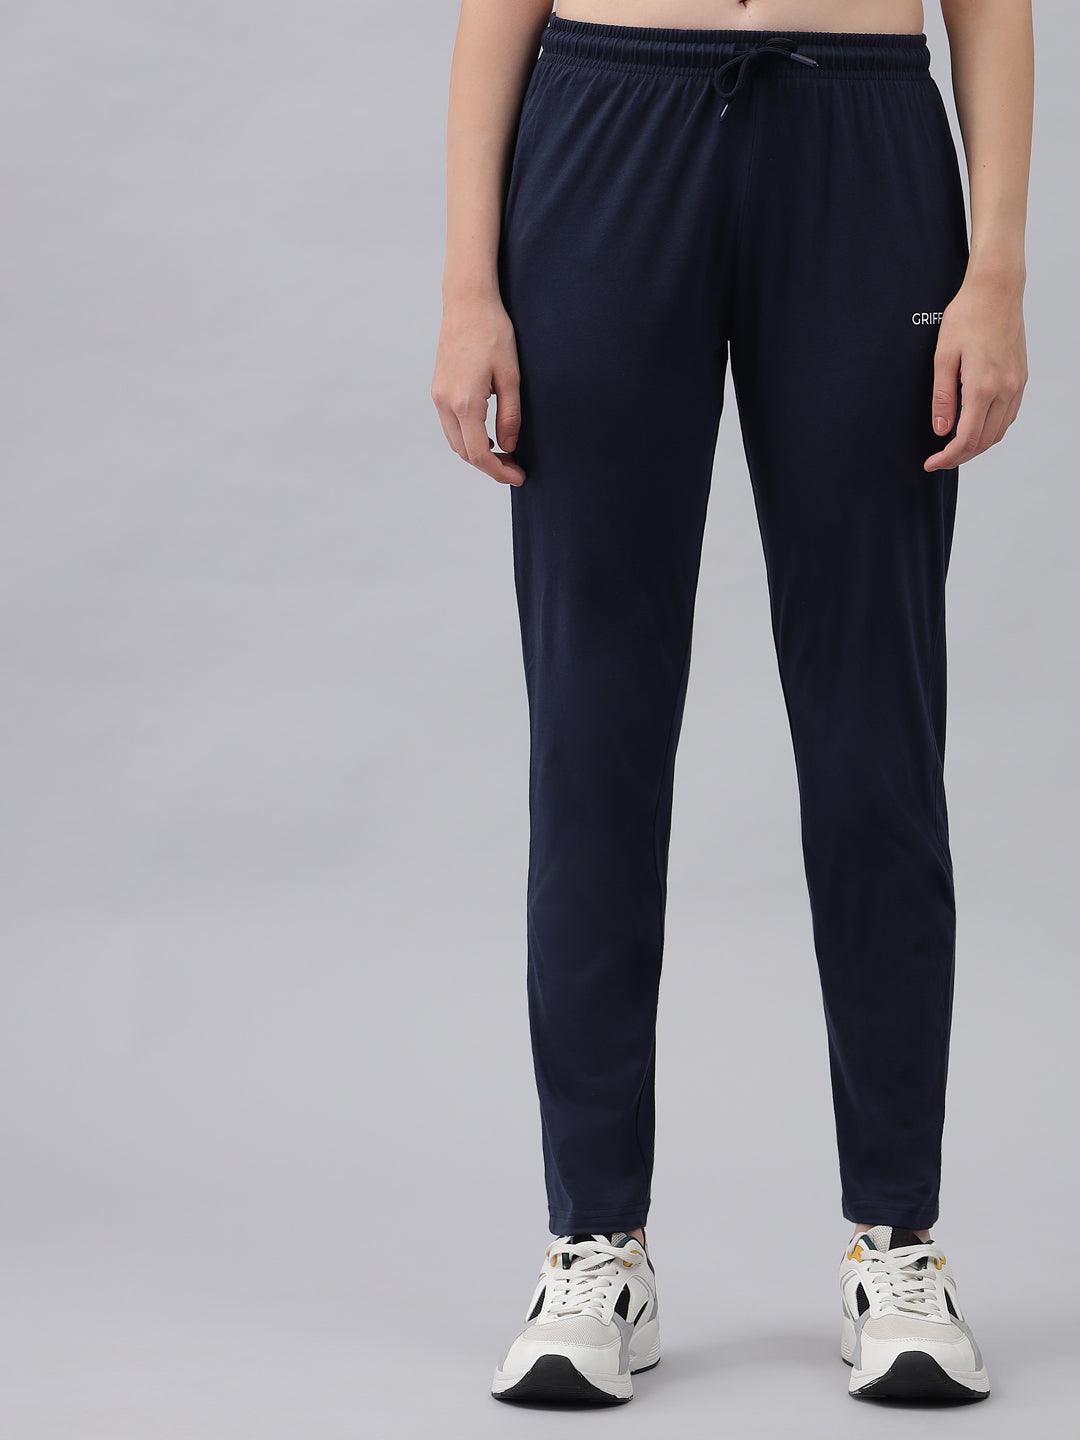 GRIFFEL Women Basic Solid Regular Fit Navy Trackpant - griffel